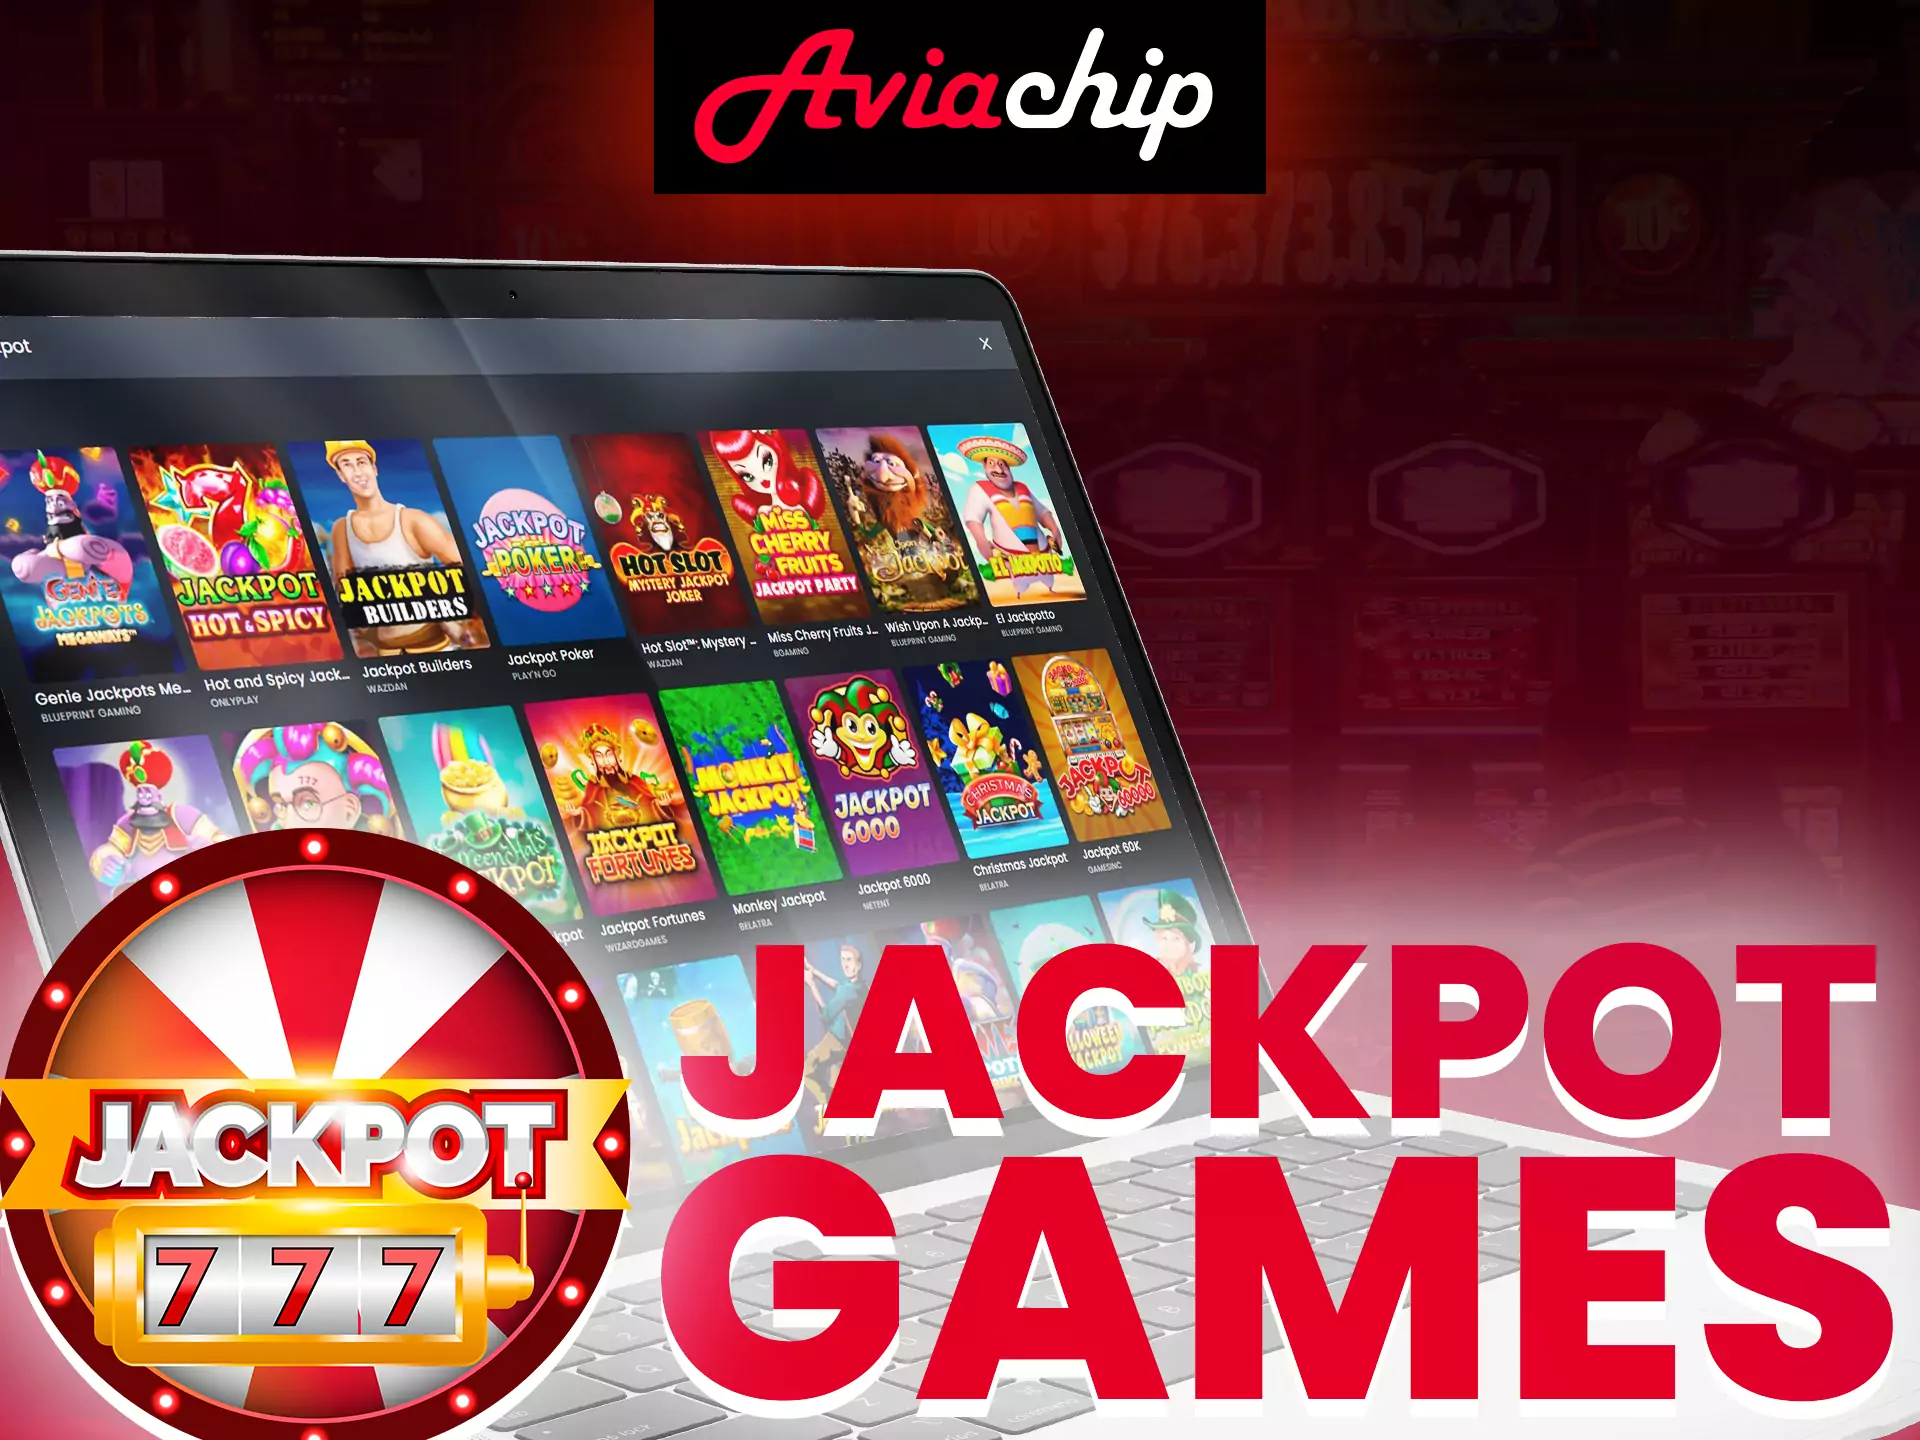 Try the jackpot games at Aviachip.